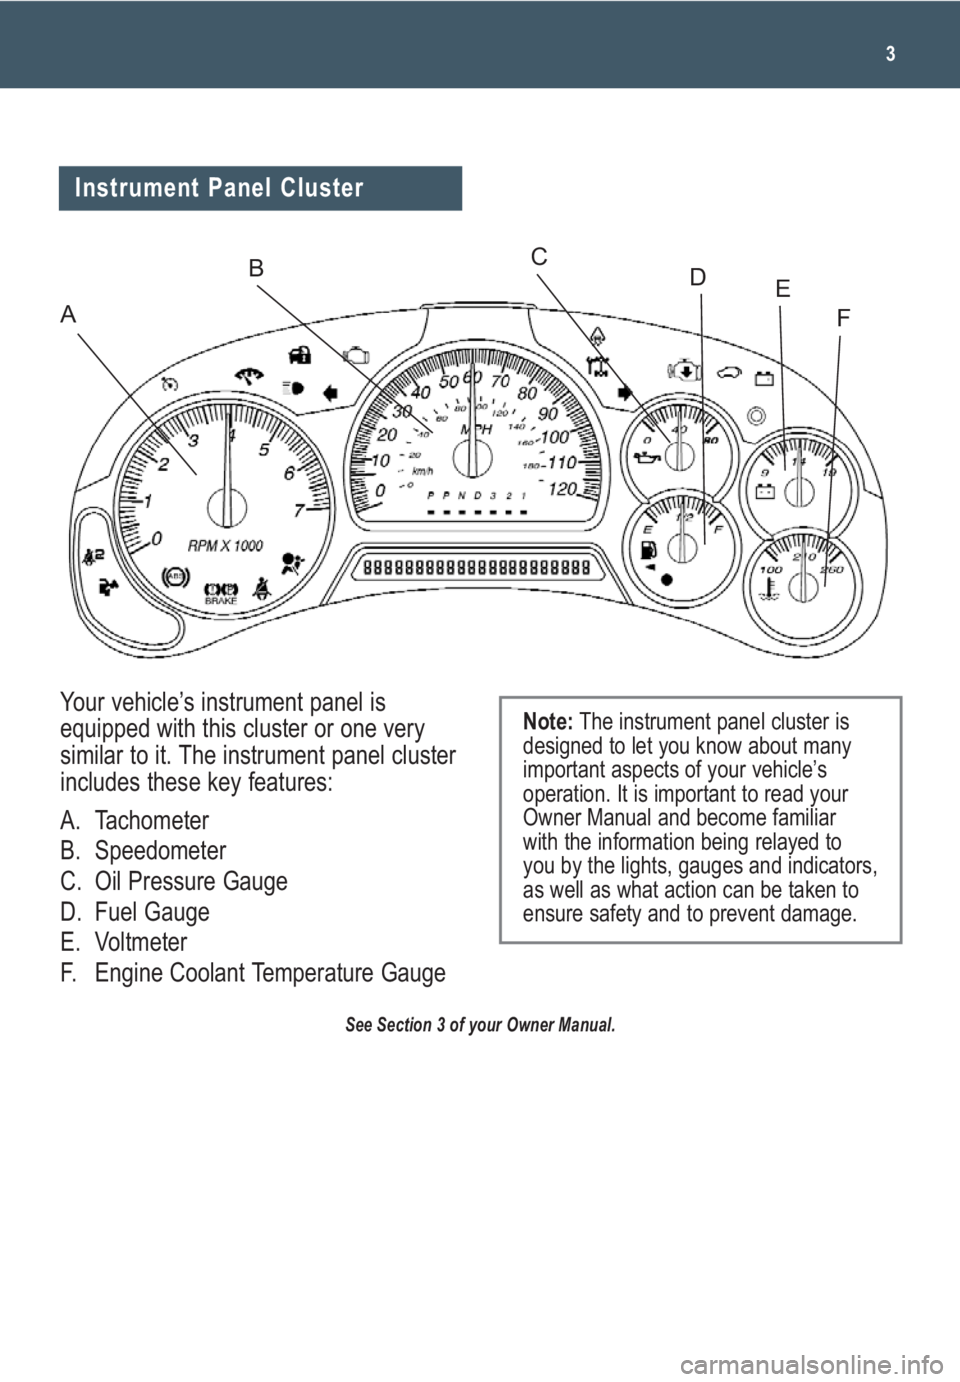 GMC ENVOY 2009  Get To Know Guide 3
Your vehicle’s instrument panel is
equipped with this cluster or one very
similar to it. The instrument panel cluster
includes these key features:
A. Tachometer
B. Speedometer 
C. Oil Pressure Gau